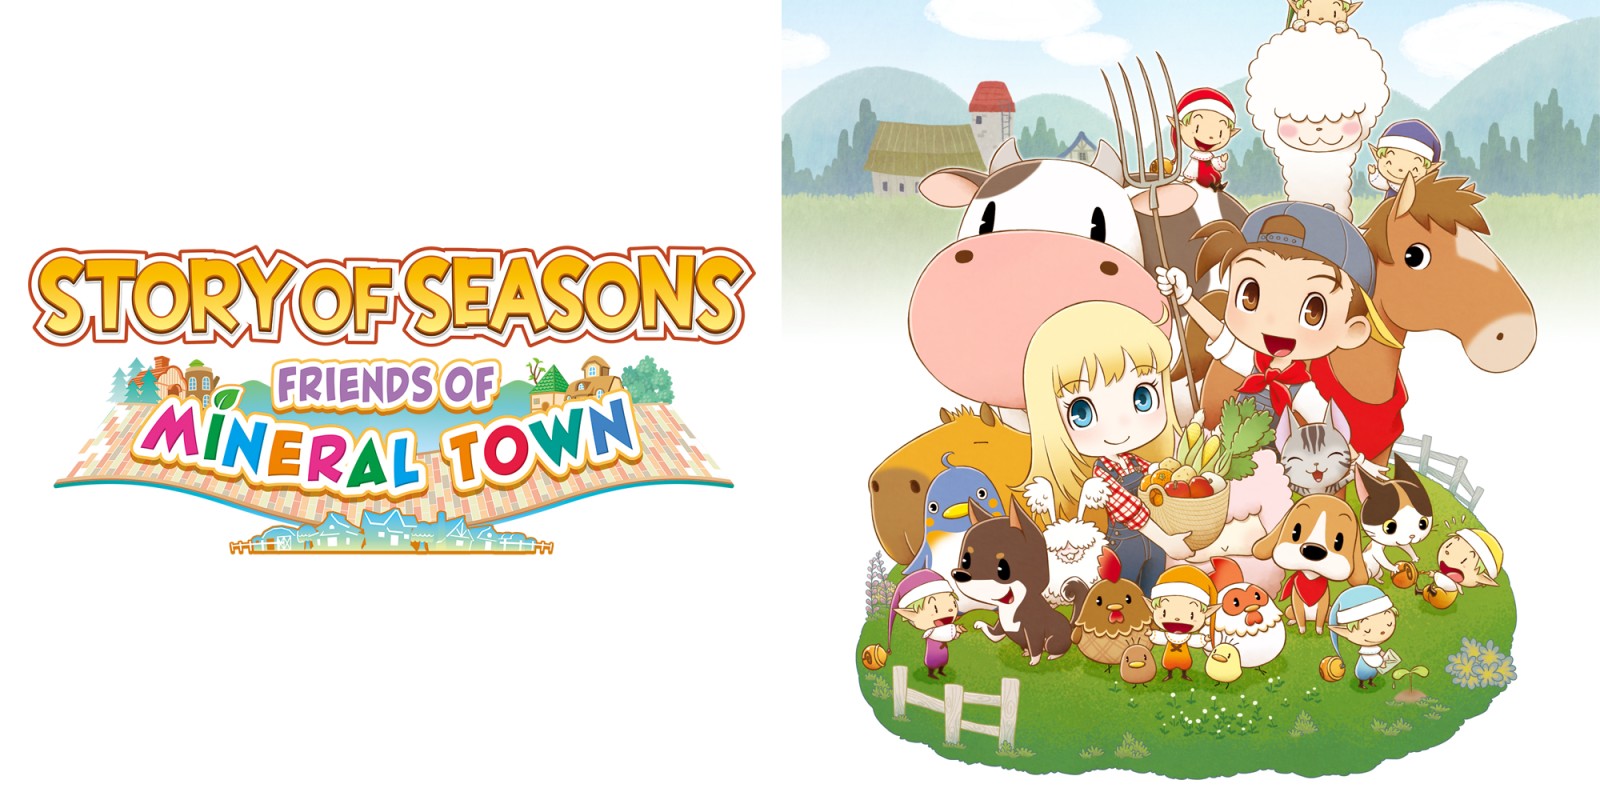 story of seasons, “Story of Seasons: Friends of Mineral Town” (Nintendo Switch) | Análise Gaming